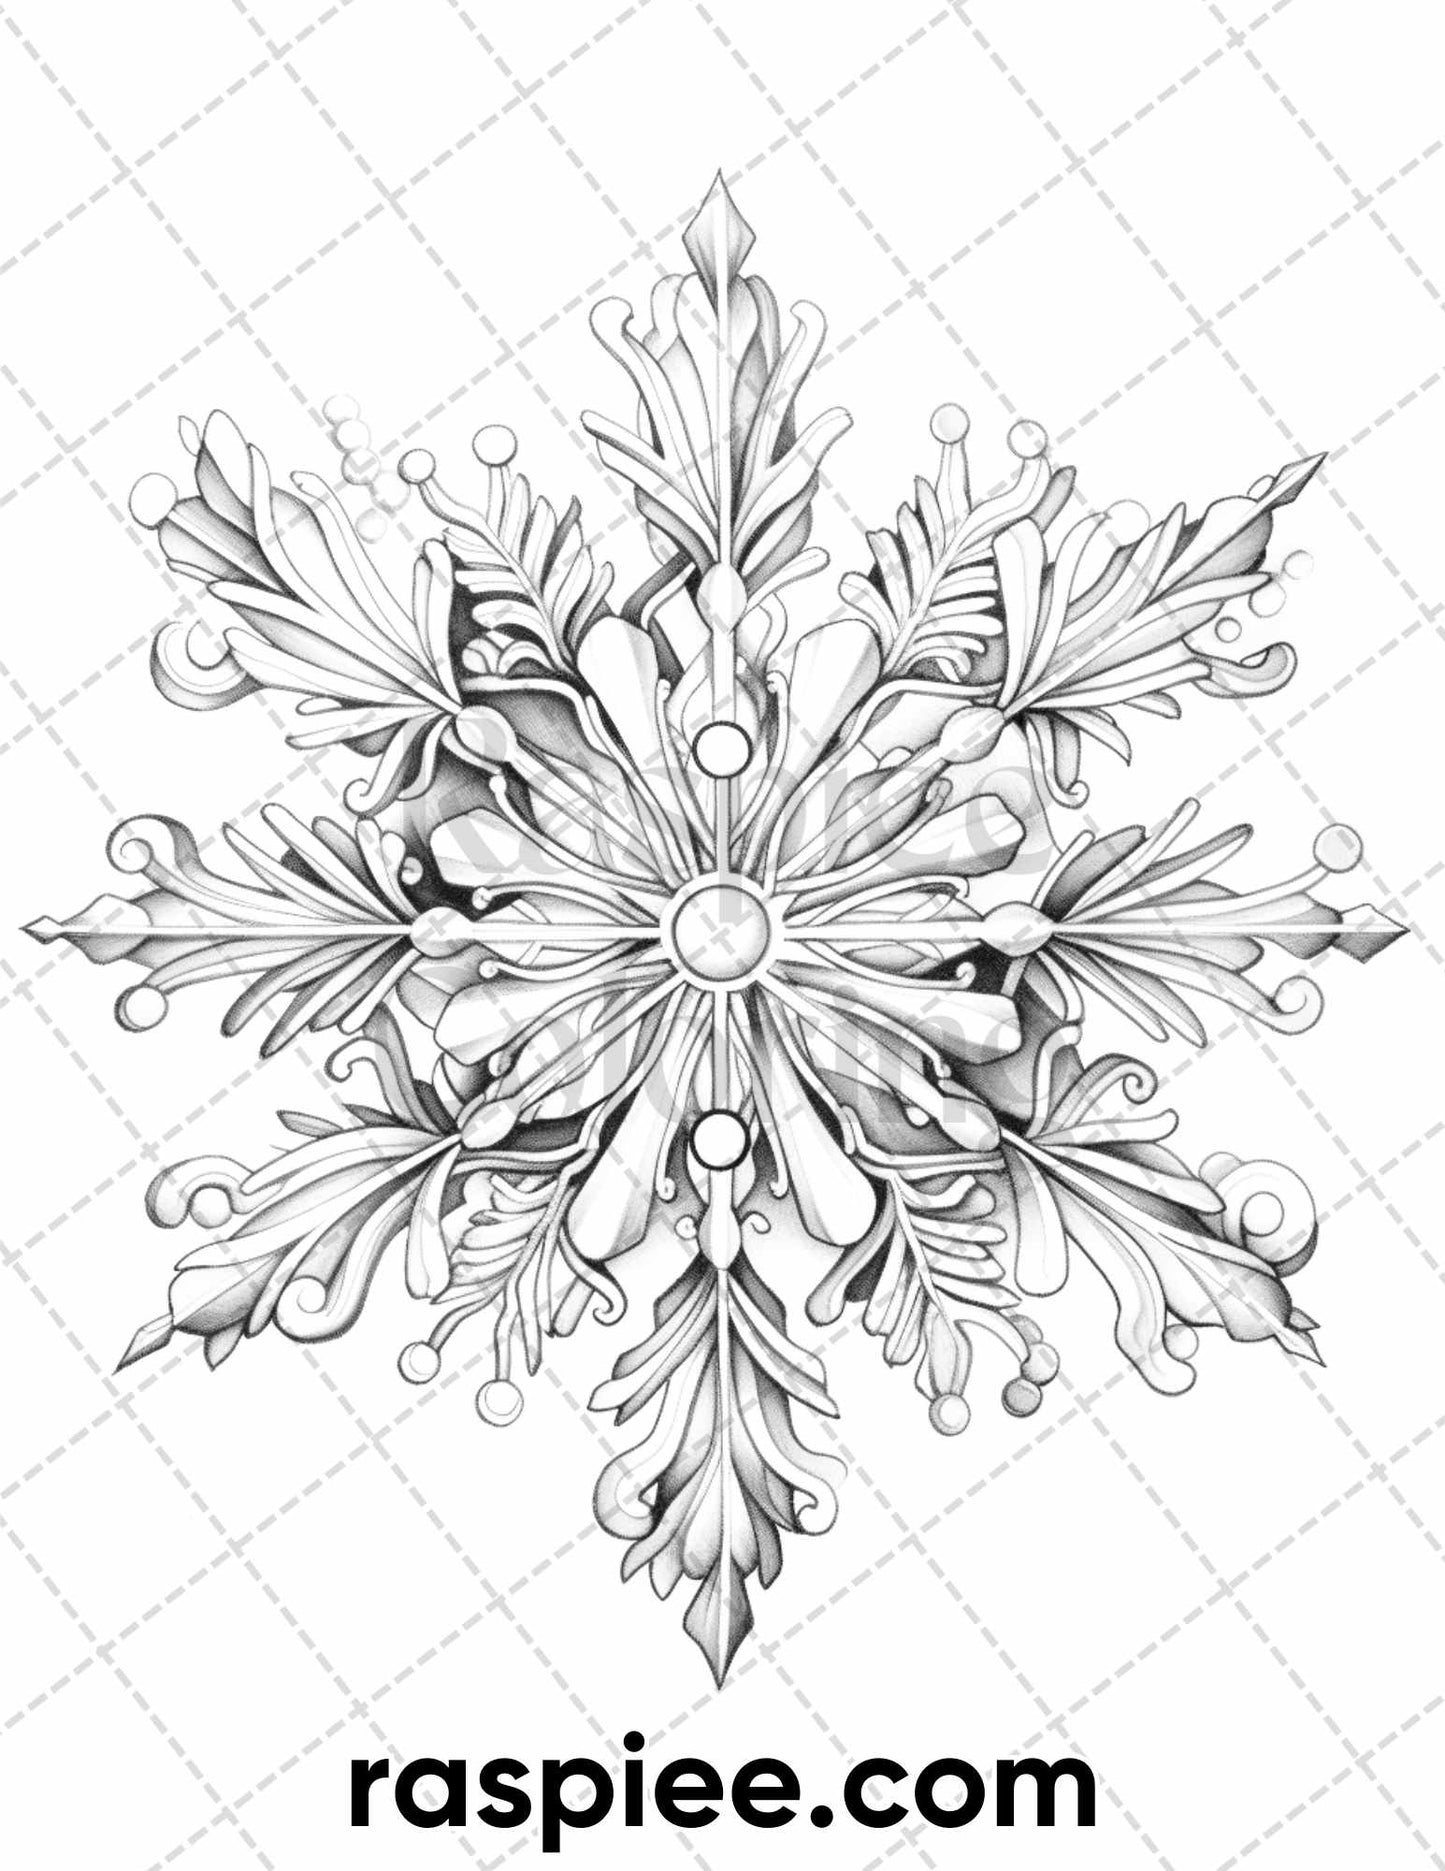 Christmas Snowflake Grayscale Coloring Pages, Adult Coloring Pages, Christmas Coloring Book Printable, Christmas Coloring Pages for Adults, Christmas Coloring Sheets, Xmas Coloring Pages, Holiday Coloring Pages, Winter Coloring Pages